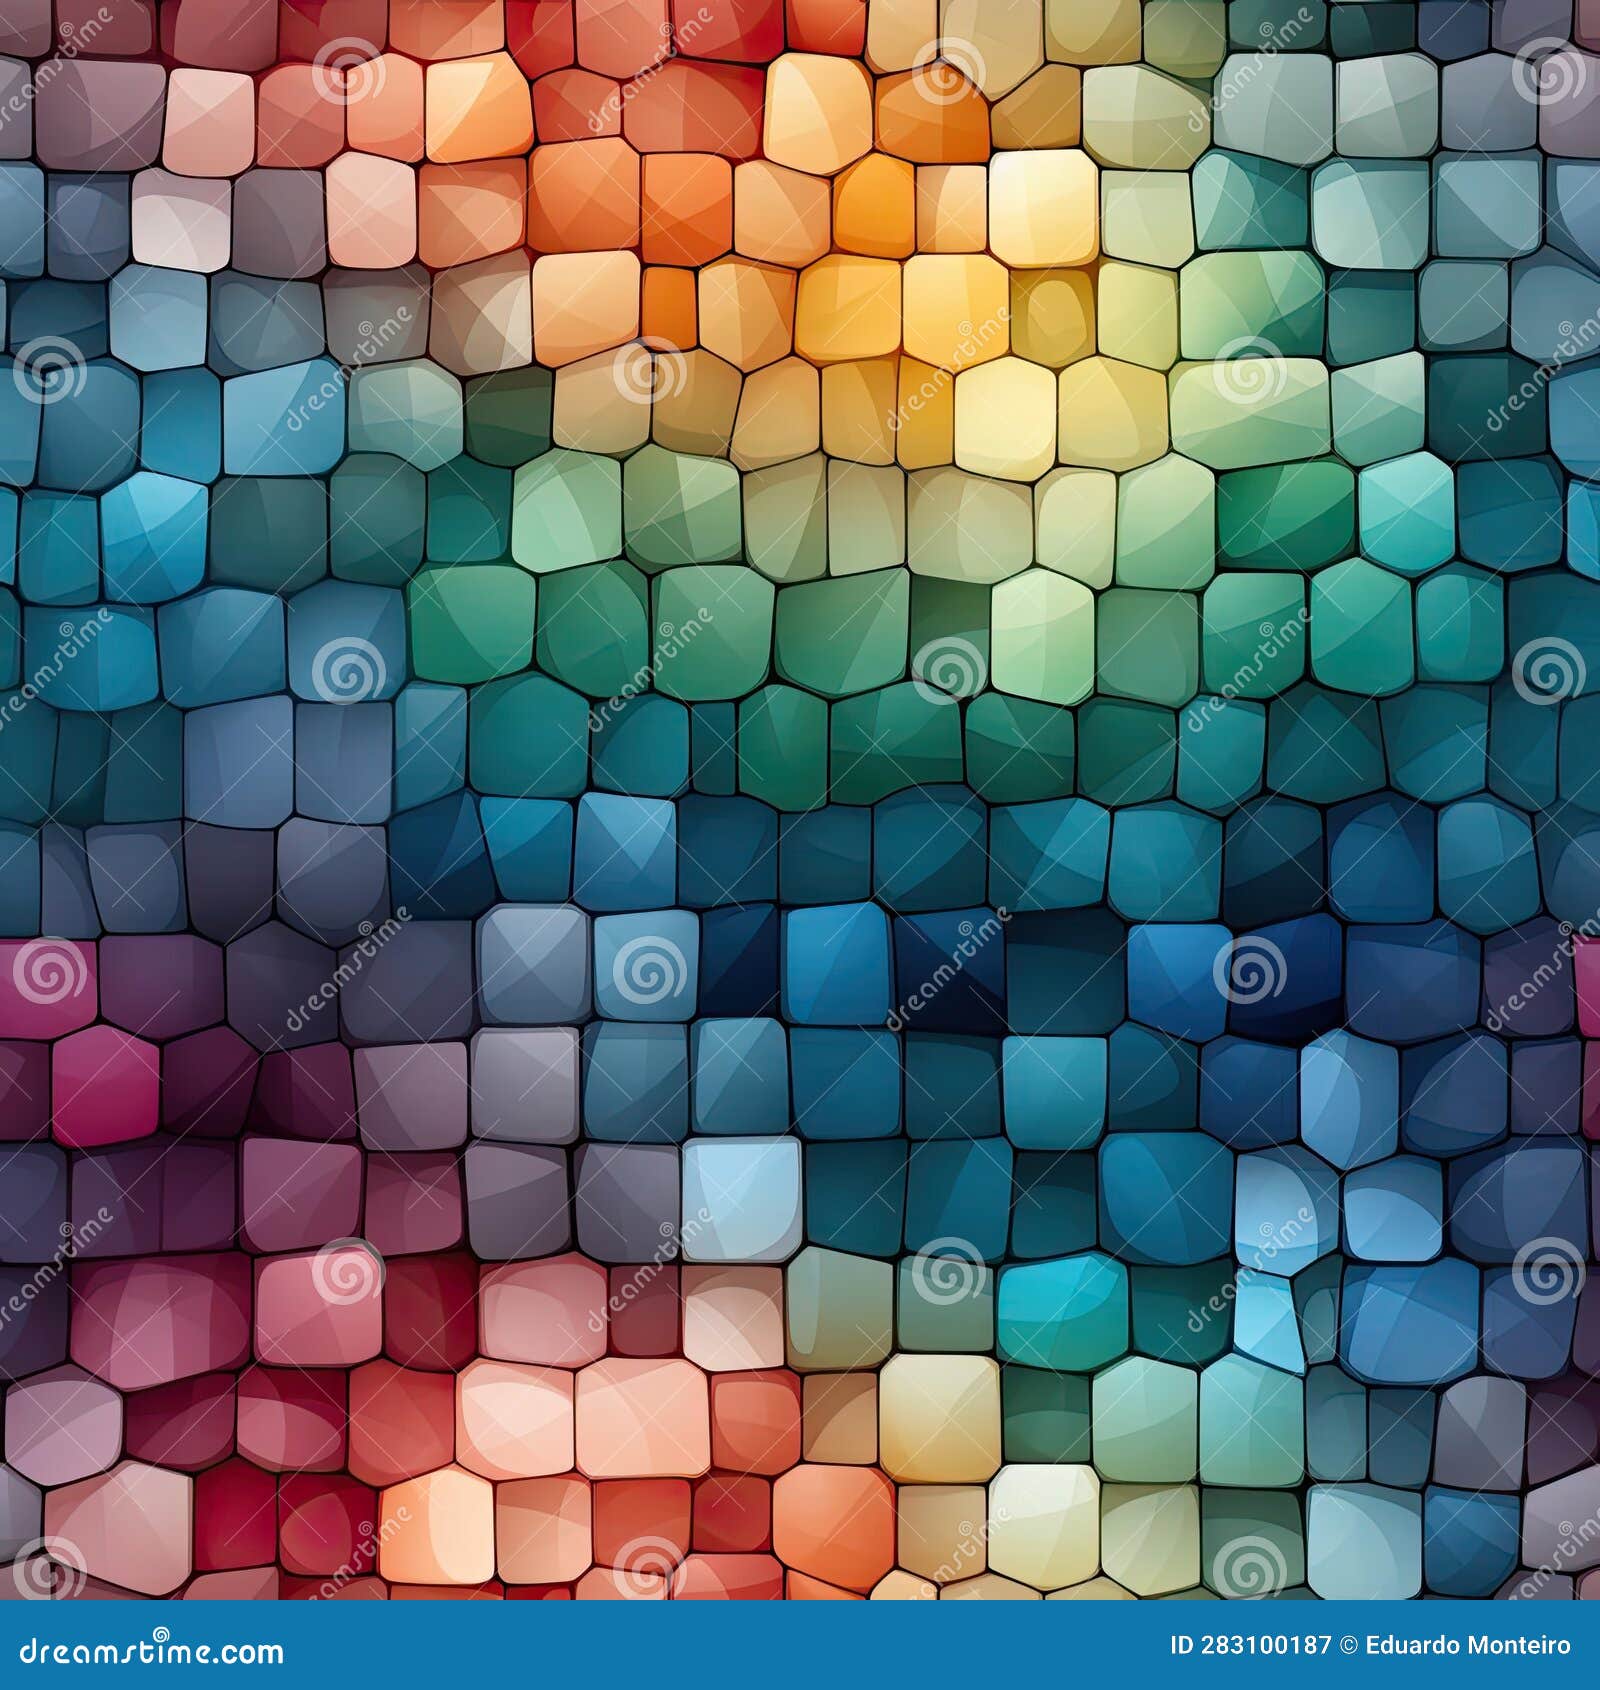 watercolor abstract cubo mosaic tile background with colorful gradients (tiled)